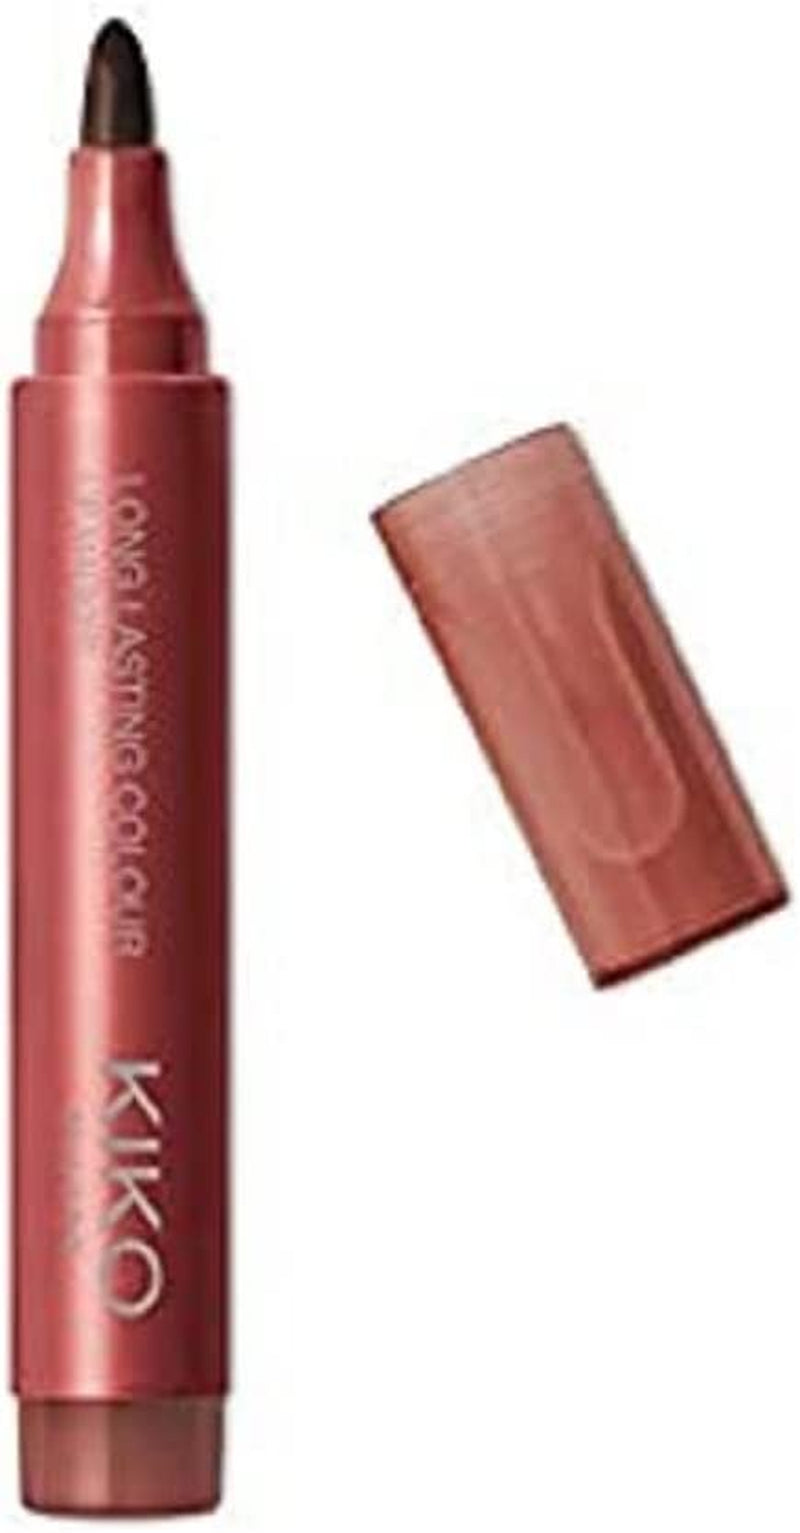 KIKO Milano Long Lasting Colour Lip Marker 111 | No Transfer Lip Marker with a Natural Tattoo Effect and Extremely Long-Lasting Wear (10 Hours)